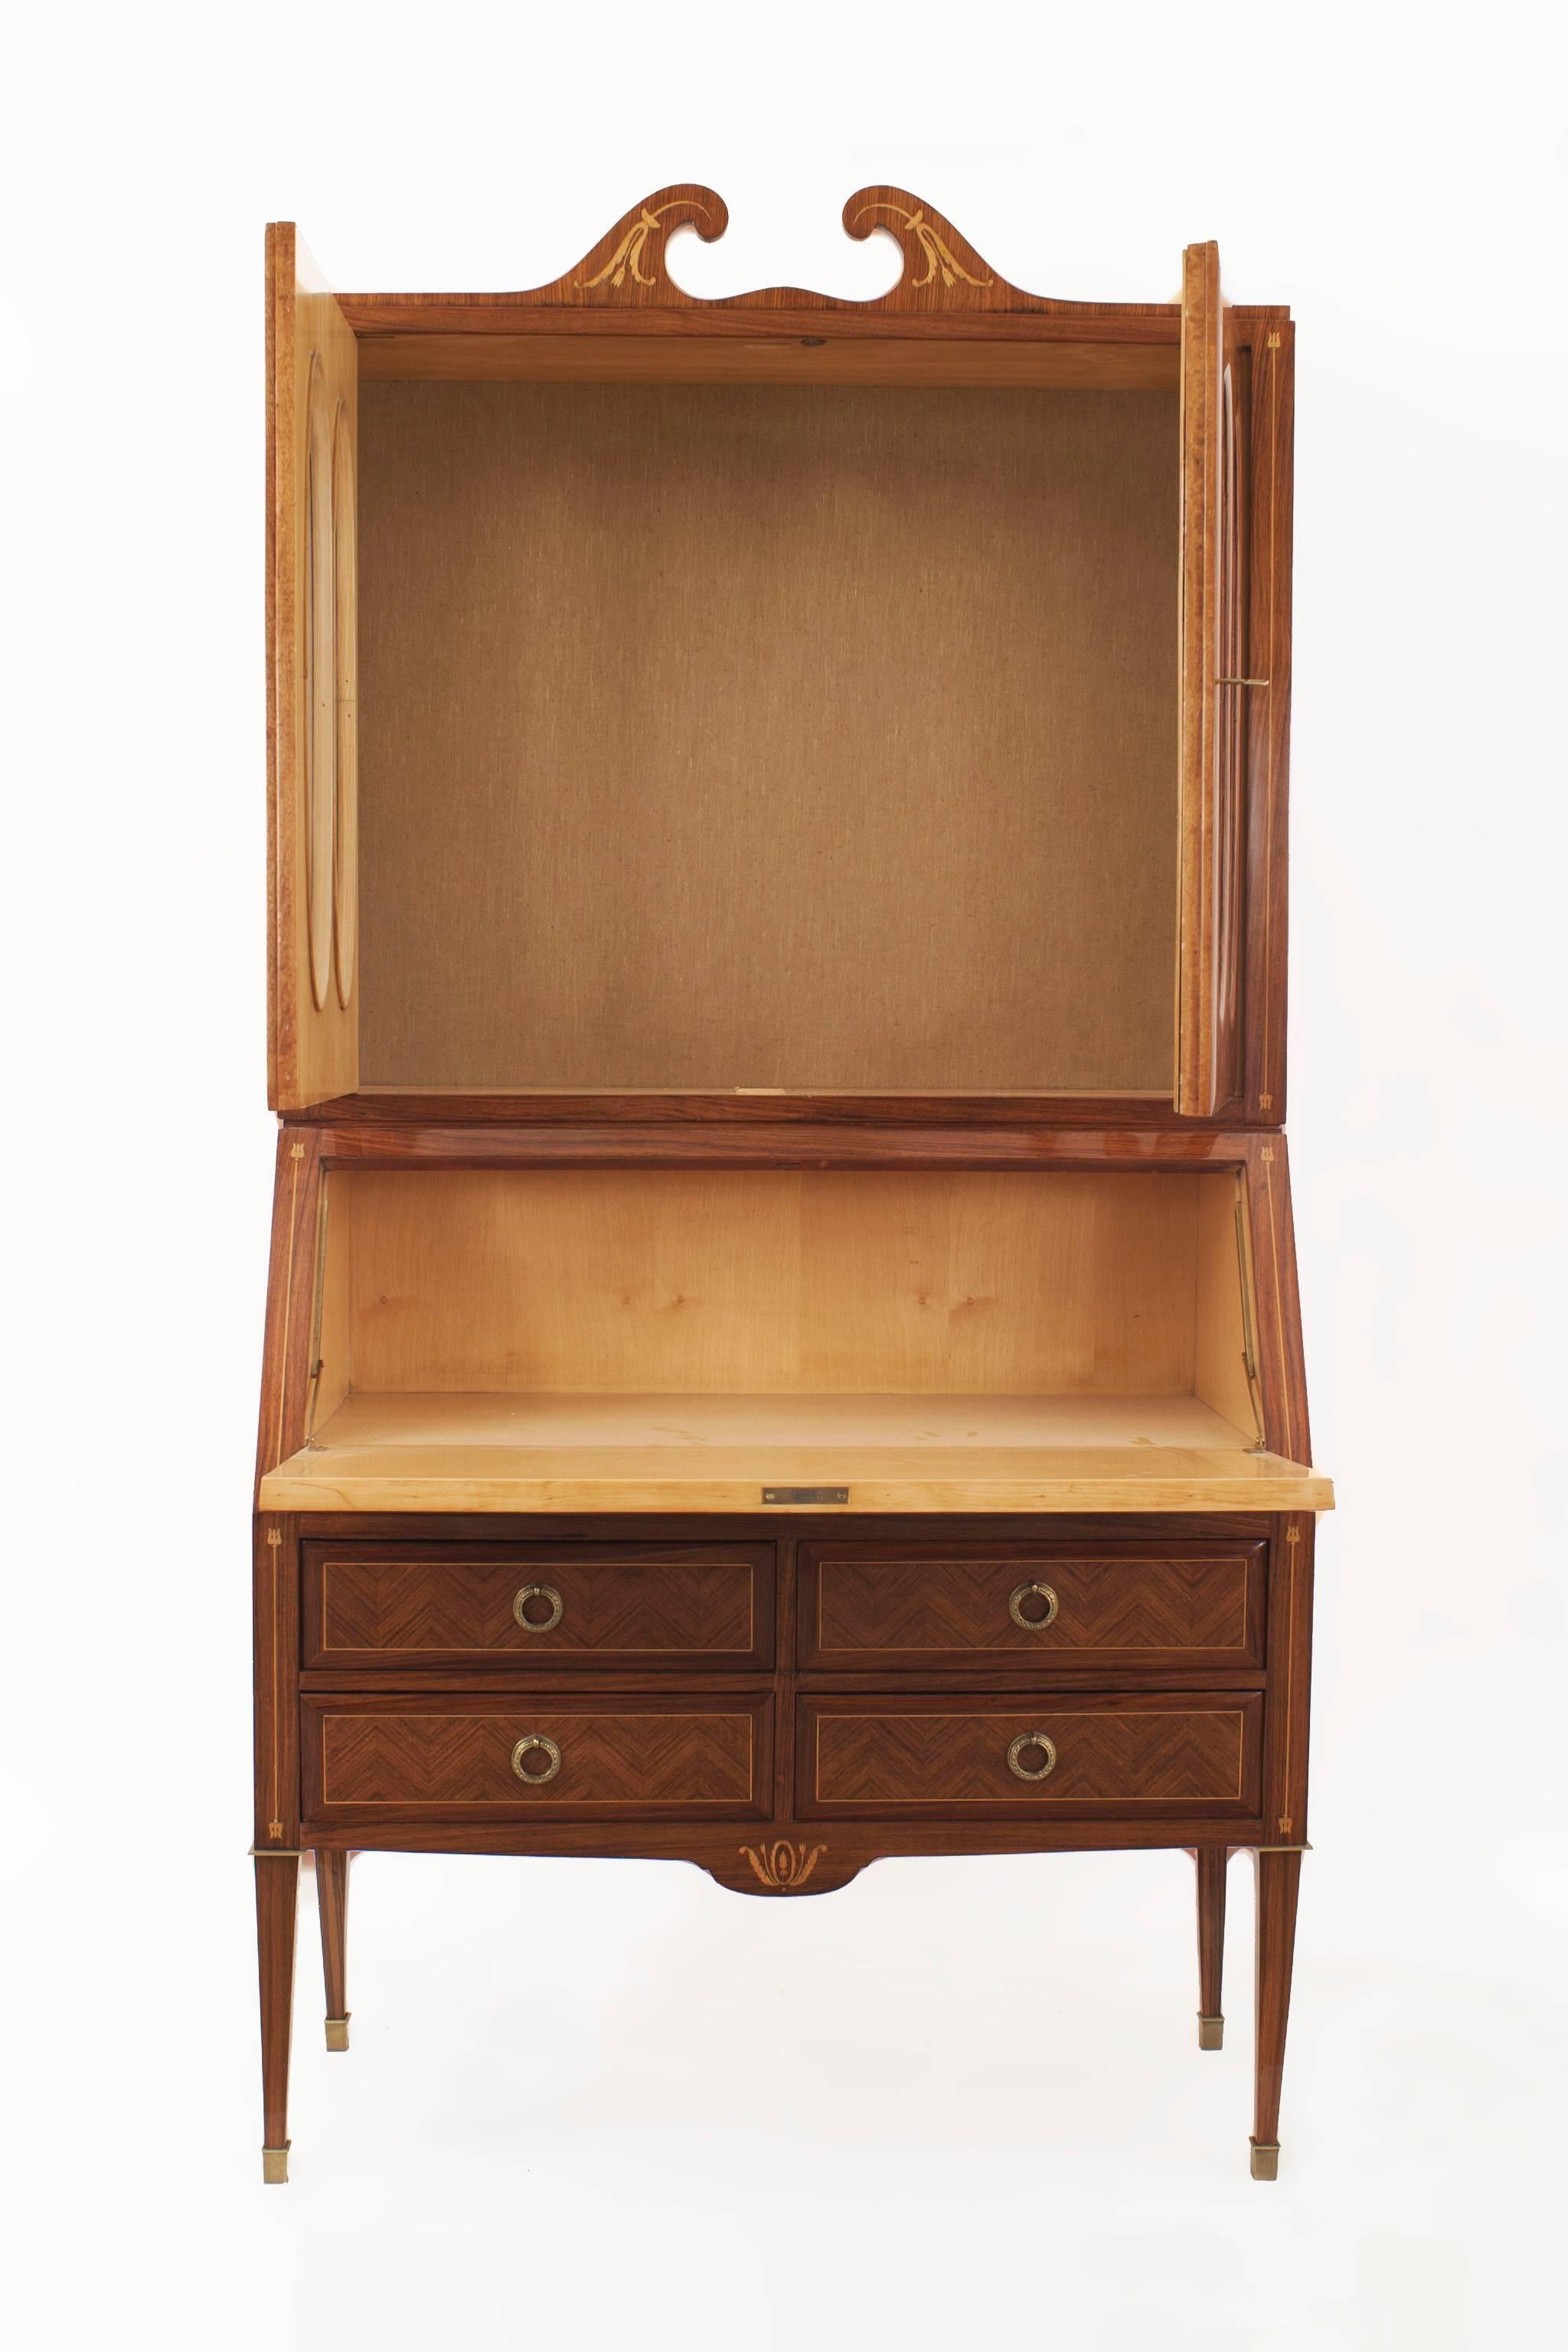 Italian Mid-Century kingwood and floral inlaid trimmed secretary cabinet with 4 oval shaped glass panel doors over a slant front desk with drawers and bronze trim (Attributed to PAOLO BUFFA)
